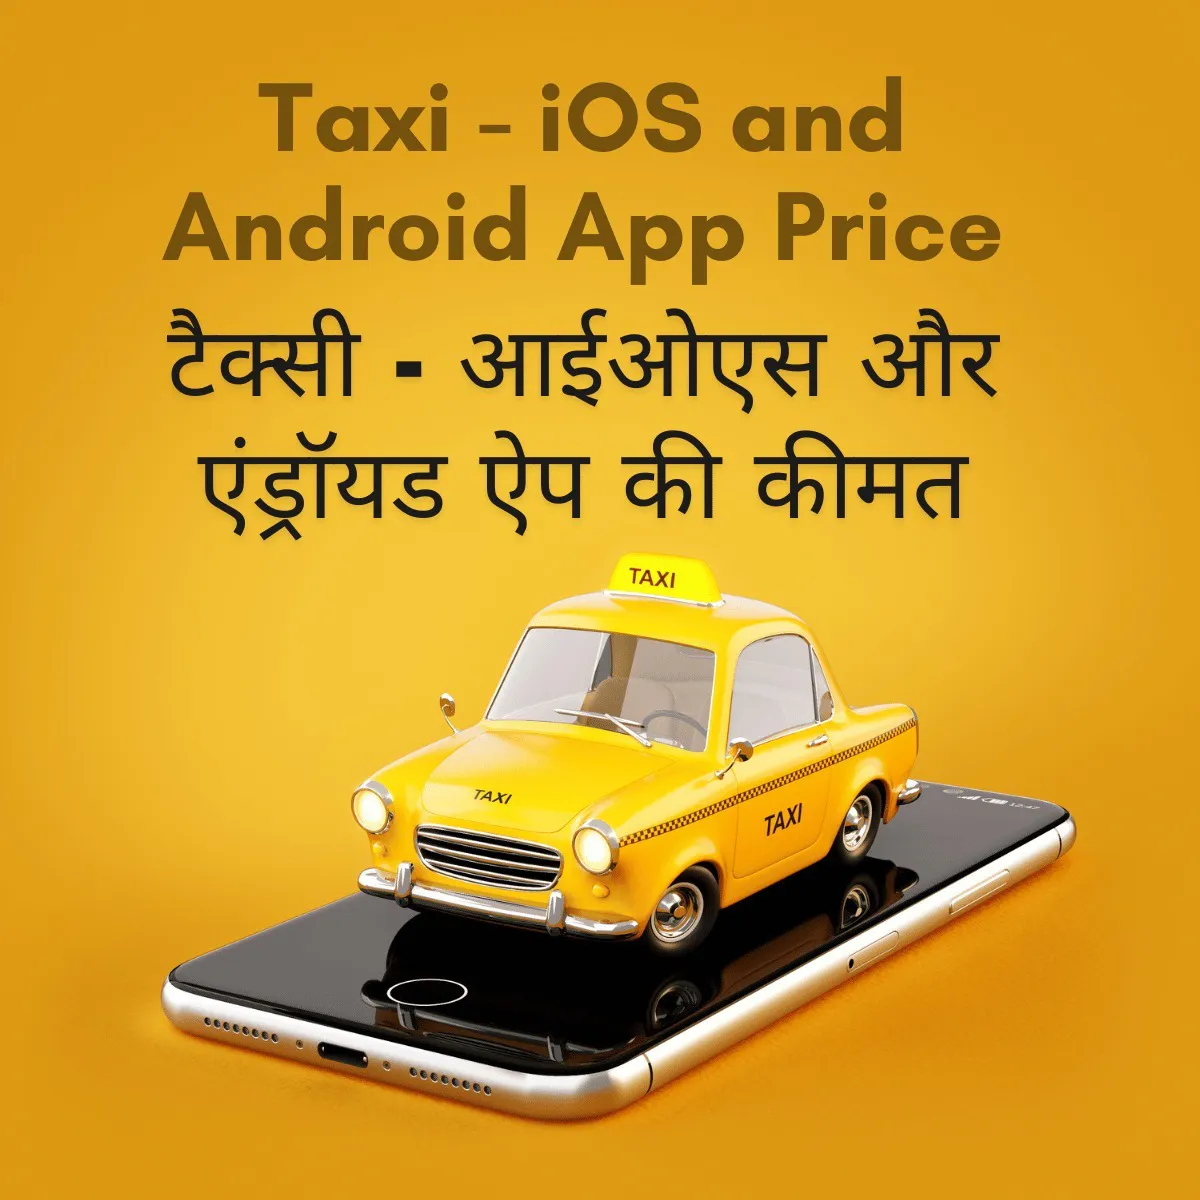 Taxi - iOS and Android App